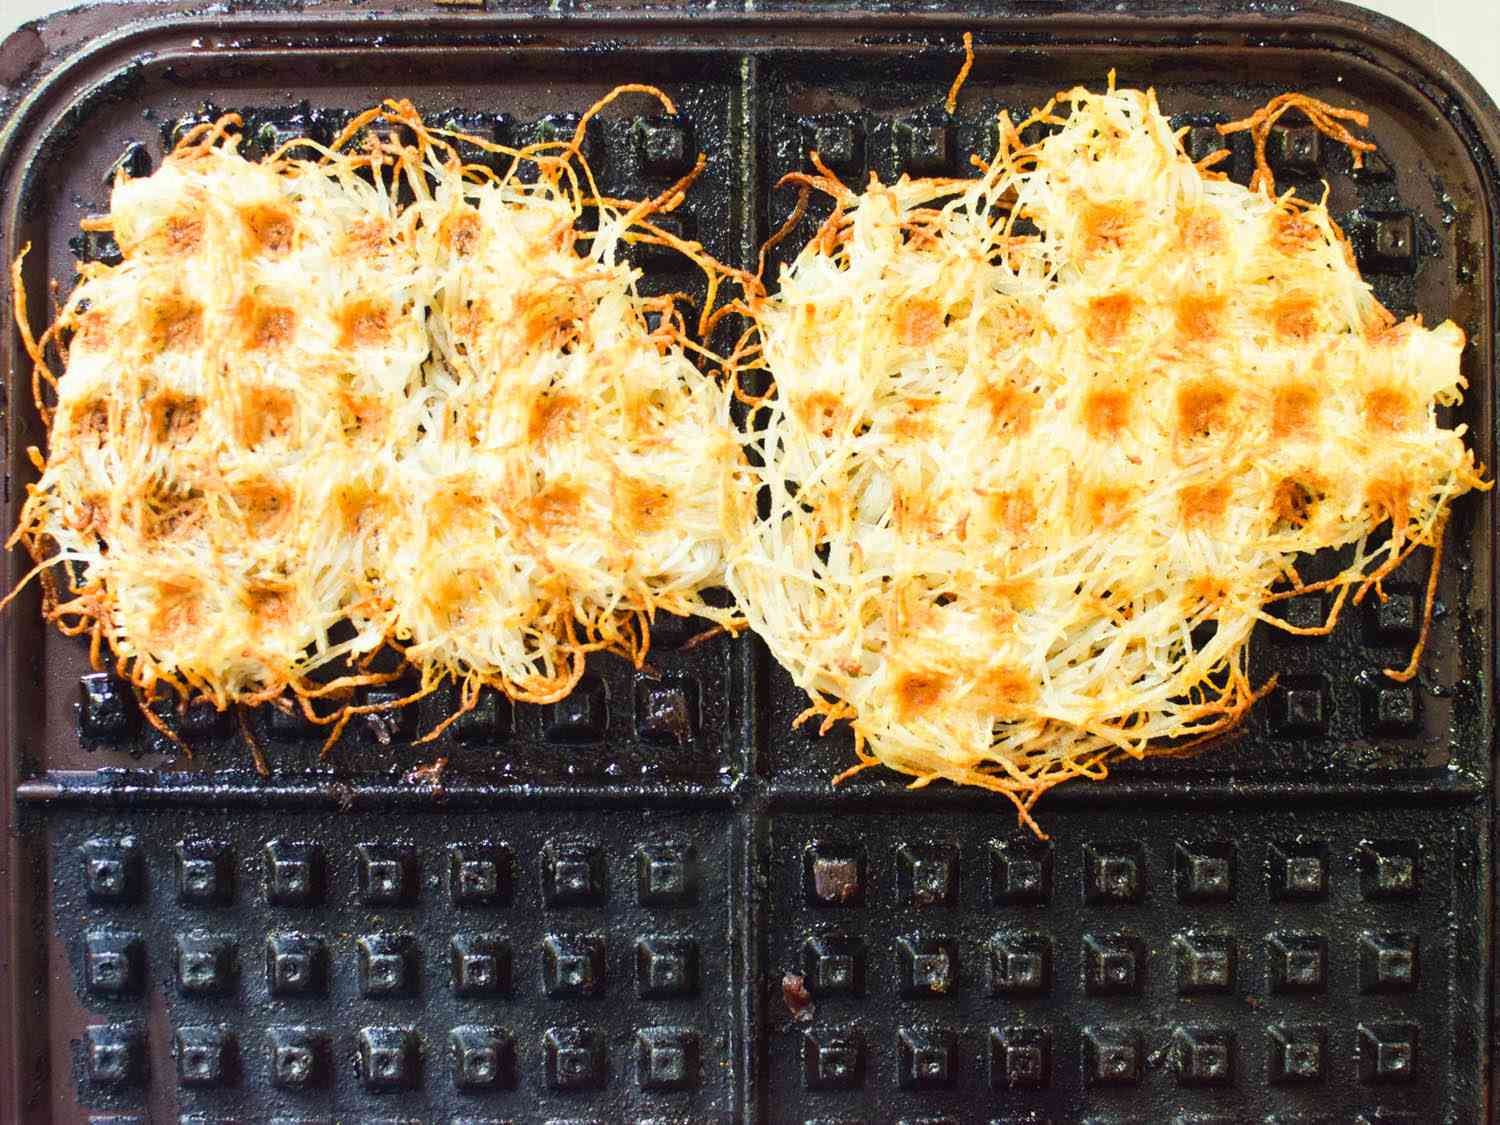 How To Cook A Potato In A Waffle Iron